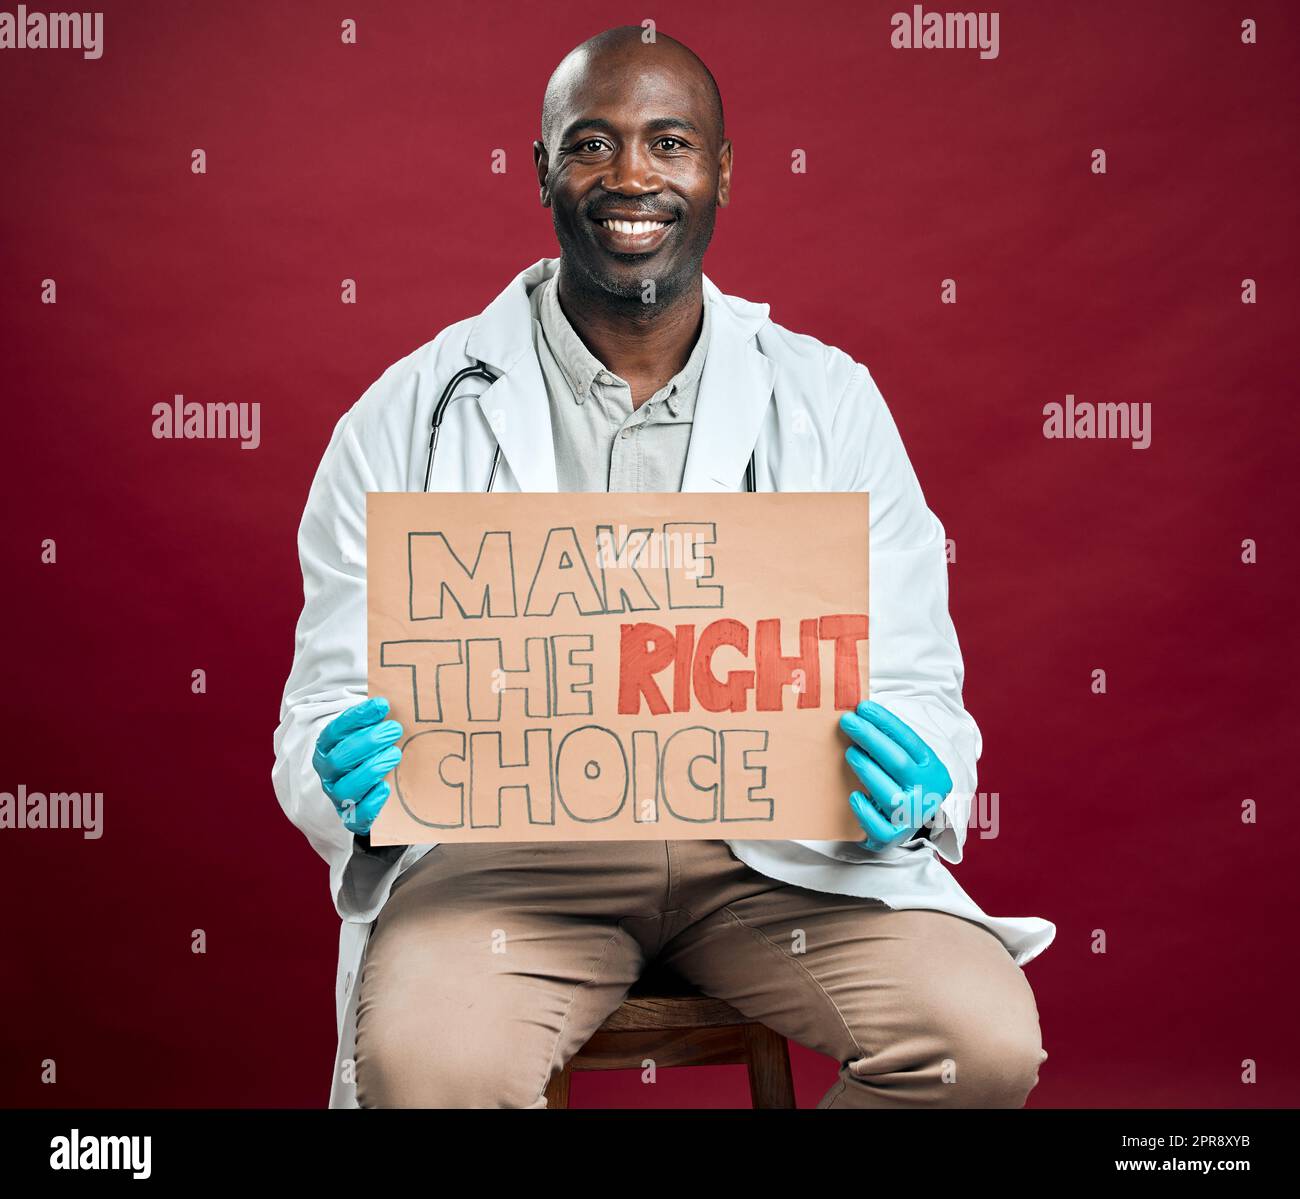 African american covid doctor holding and showing poster. Portrait of smiling black physician isolated on red studio background with copyspace. Man promoting and encouraging corona vaccine on sign Stock Photo